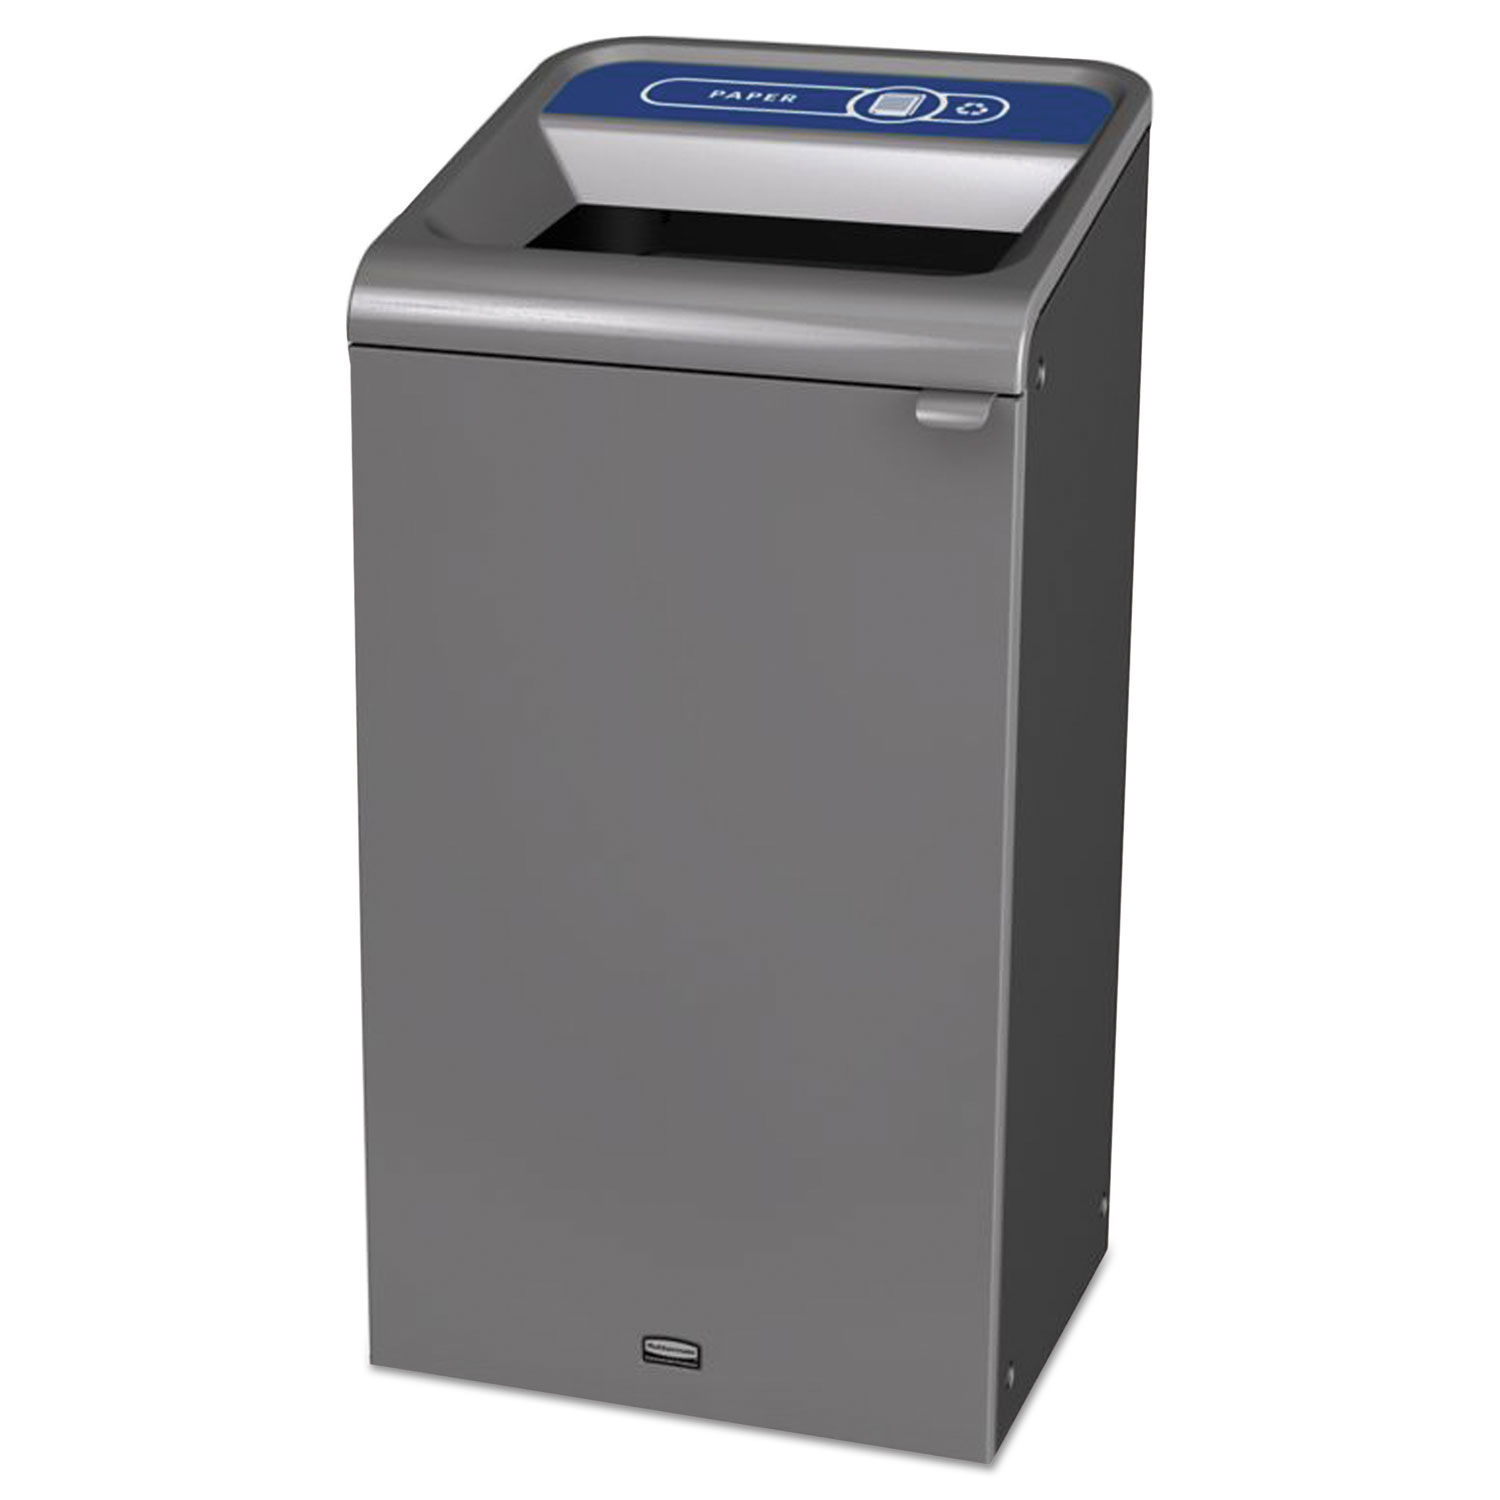 Configure Indoor Recycling Waste Receptacle Paper Recycling, 23 gal, Metal, Gray